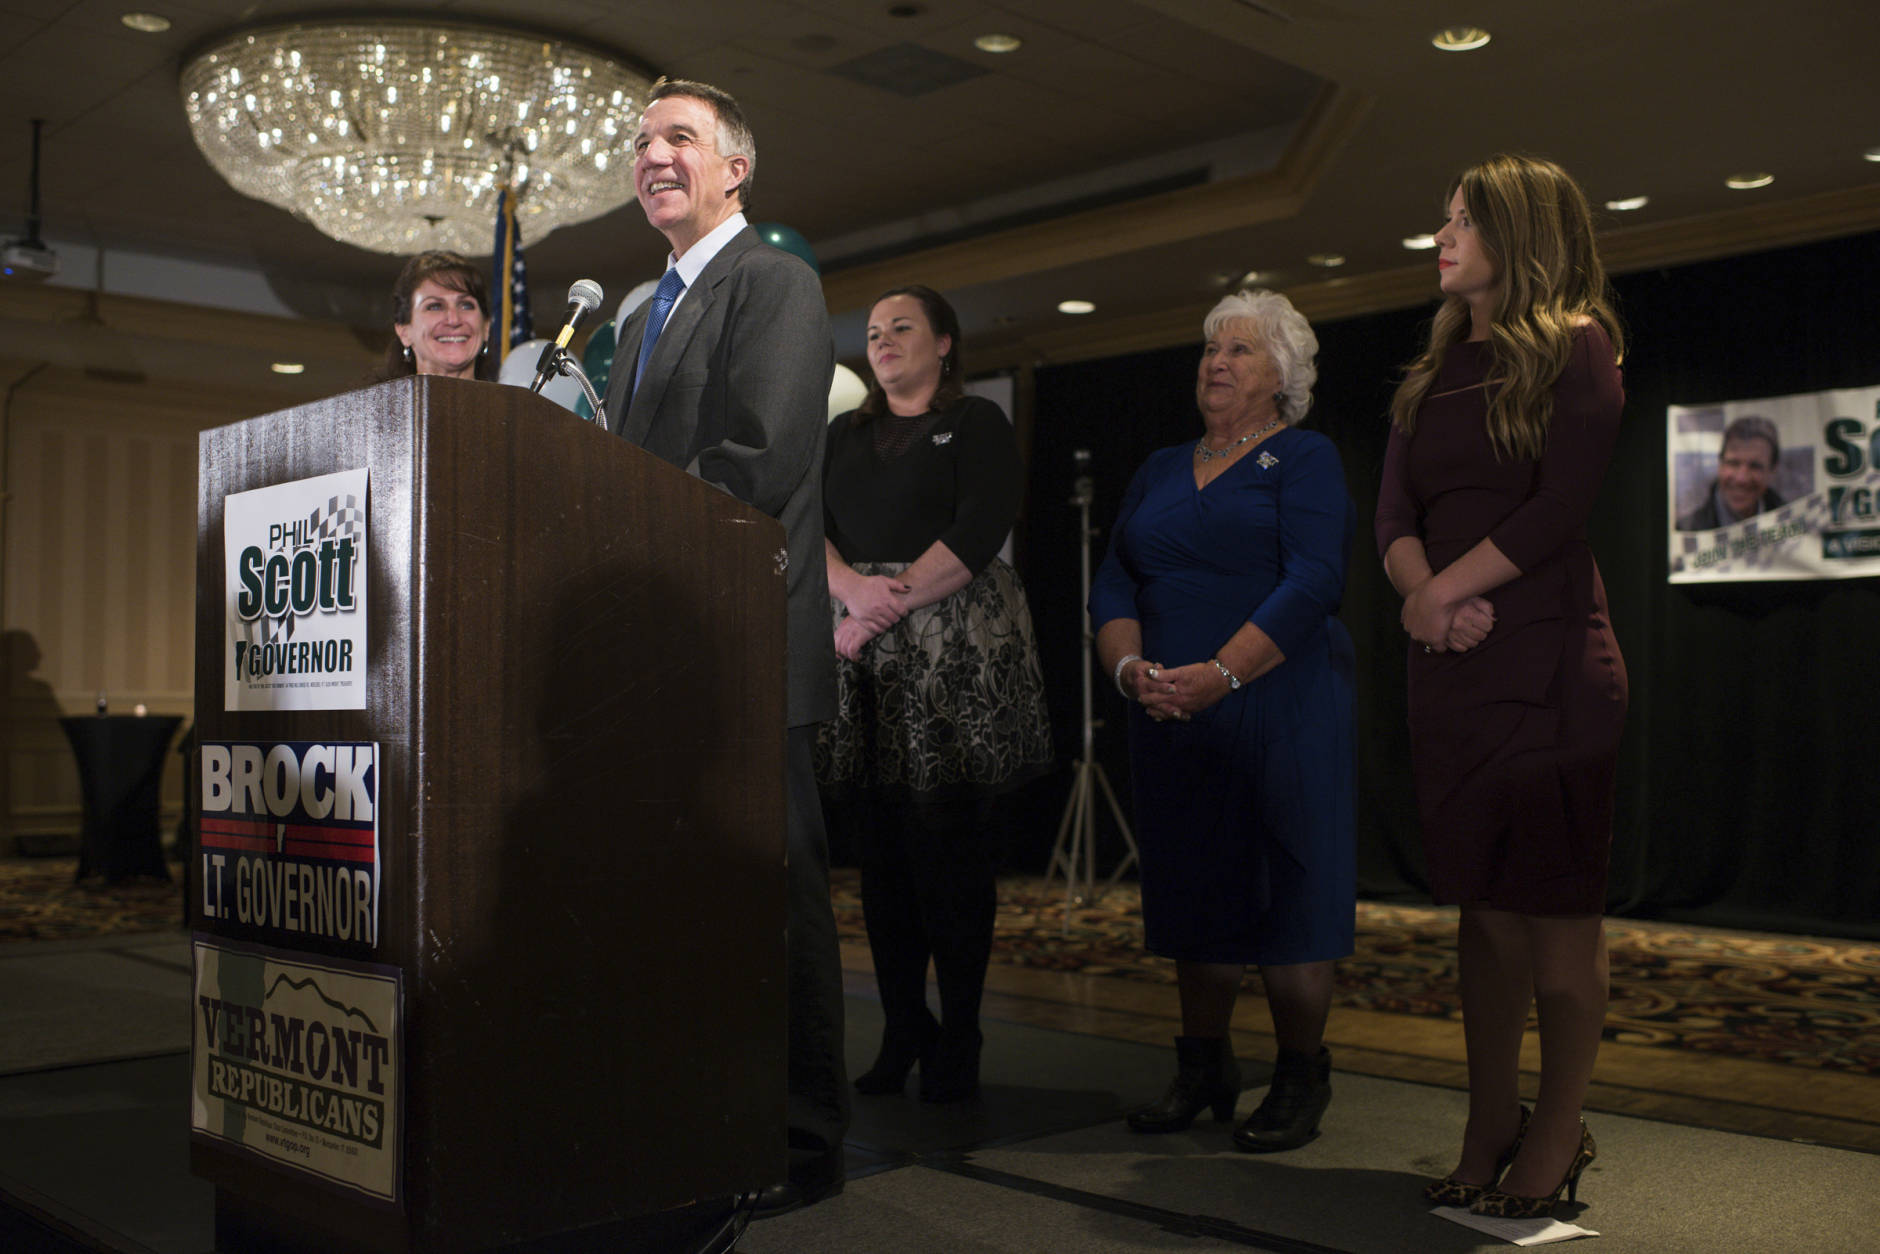 Vermont Republican Phil Scott, who won the Vermont governor's race, speaks to a room full of supporters along with his family on stage Tuesday, Nov. 8, 2016, in South Burlington, Vt. (AP Photo/Andy Duback)